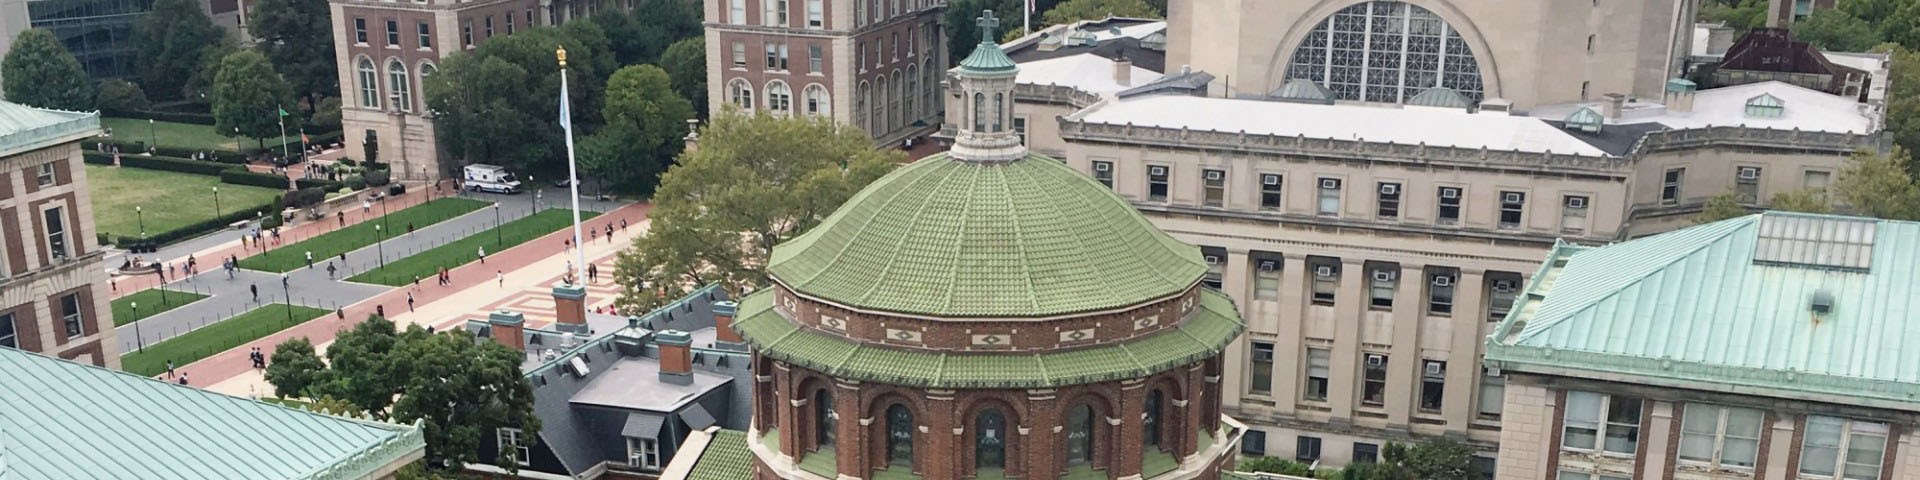 Aerial view of St. Paul's Chapel, a red brick building with a green, terra cotta tile roof, and campus. Historic stone buildings surround the chapel. Green lawns and red brick paver walkway in the background.